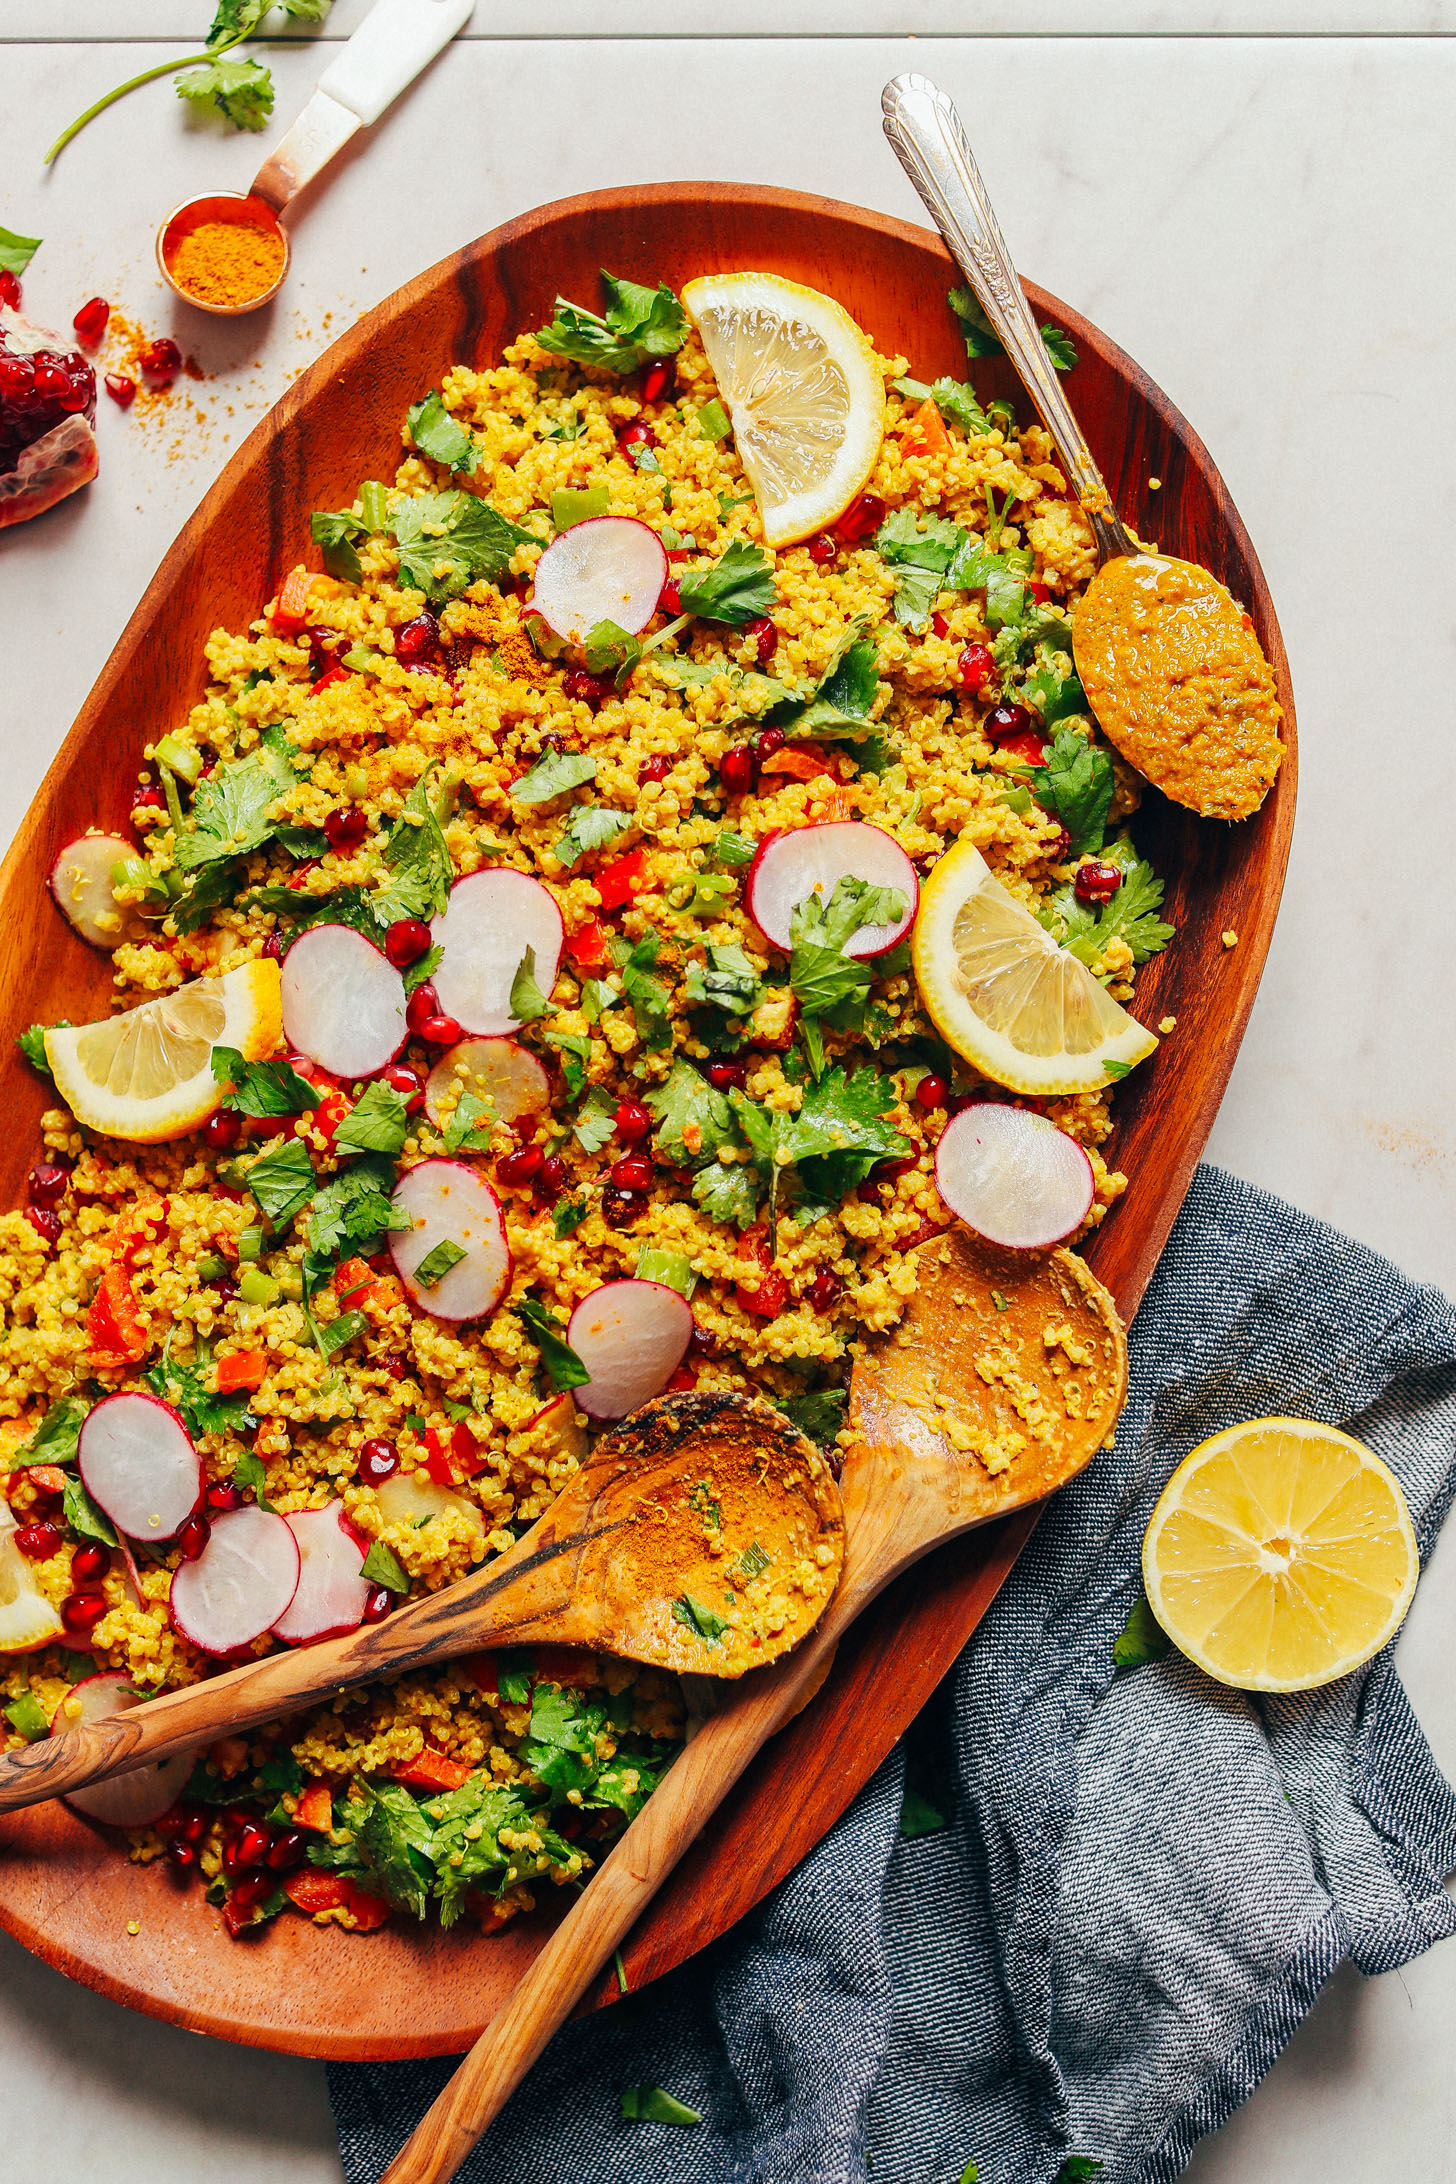 DELICIOUS Curried Quinoa Salad with vegetables & Creamy Curry Dressing! Flavorful, healthy, 10 ingredients required! #vegan #glutenfree #plantbased #quinoa #curry #salad #recipe-53